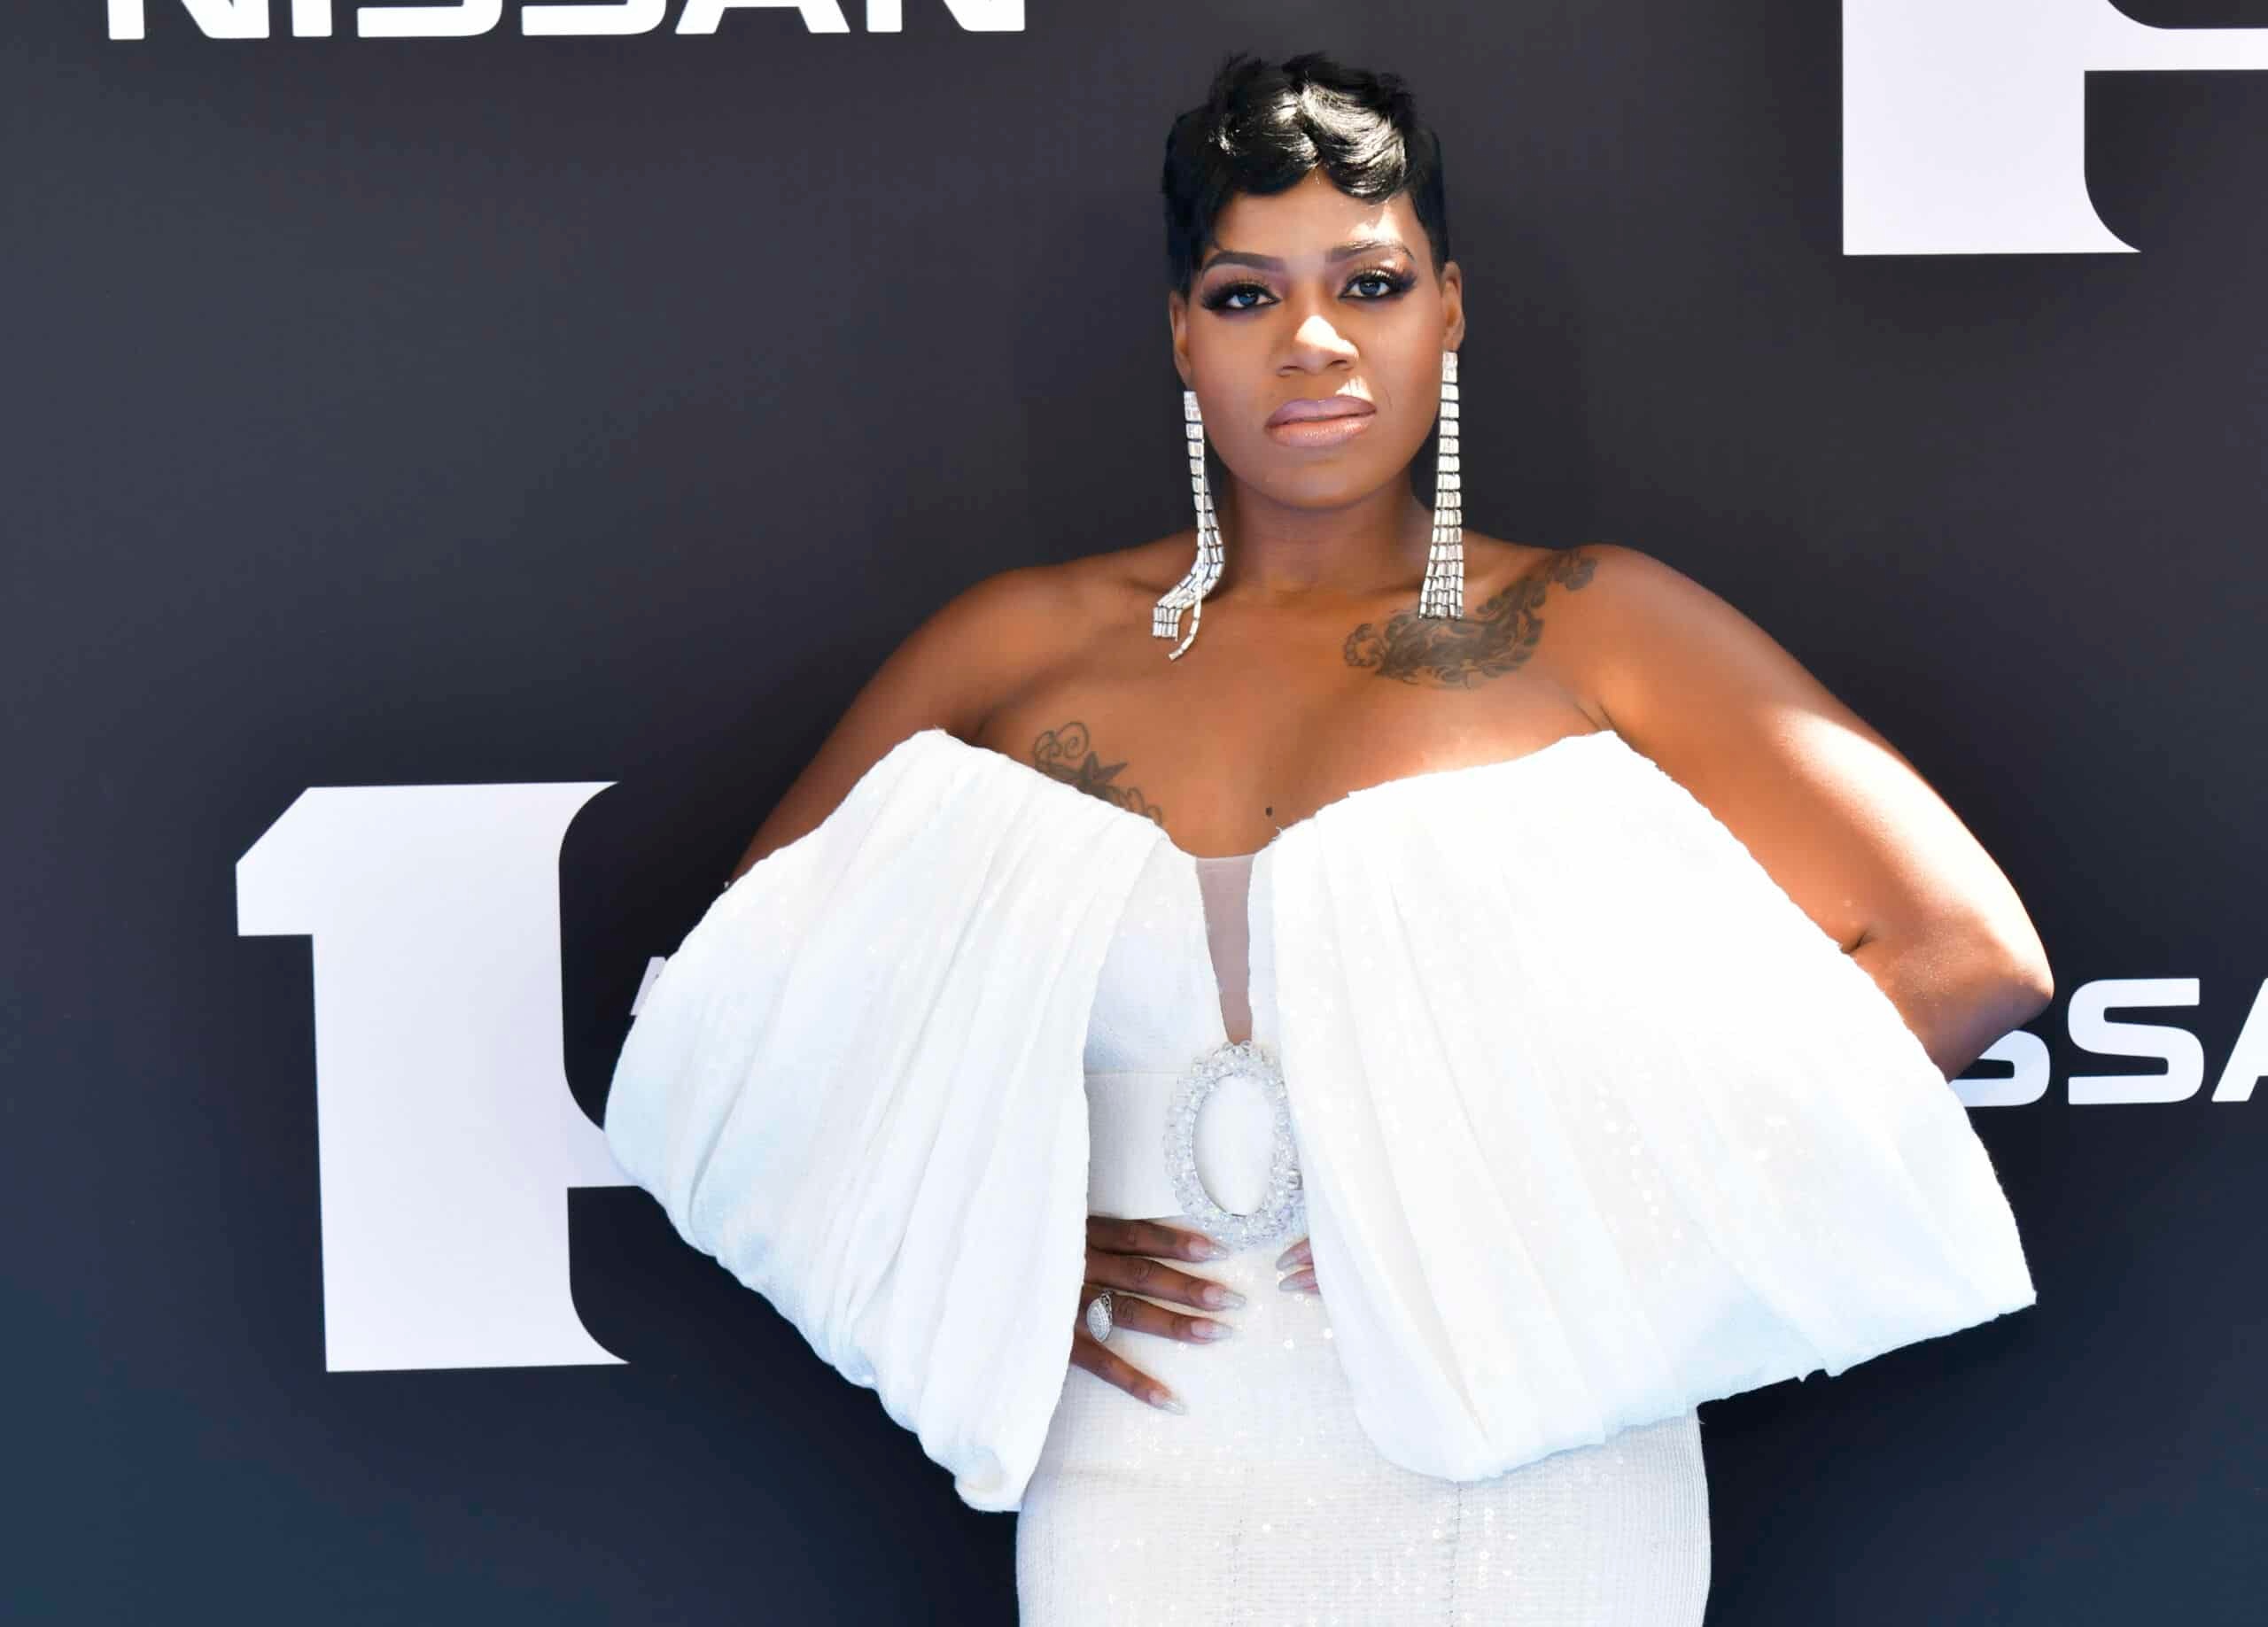 Fantasia Barrino Blasts Airbnb After Accusing Host Of Racial Profiling